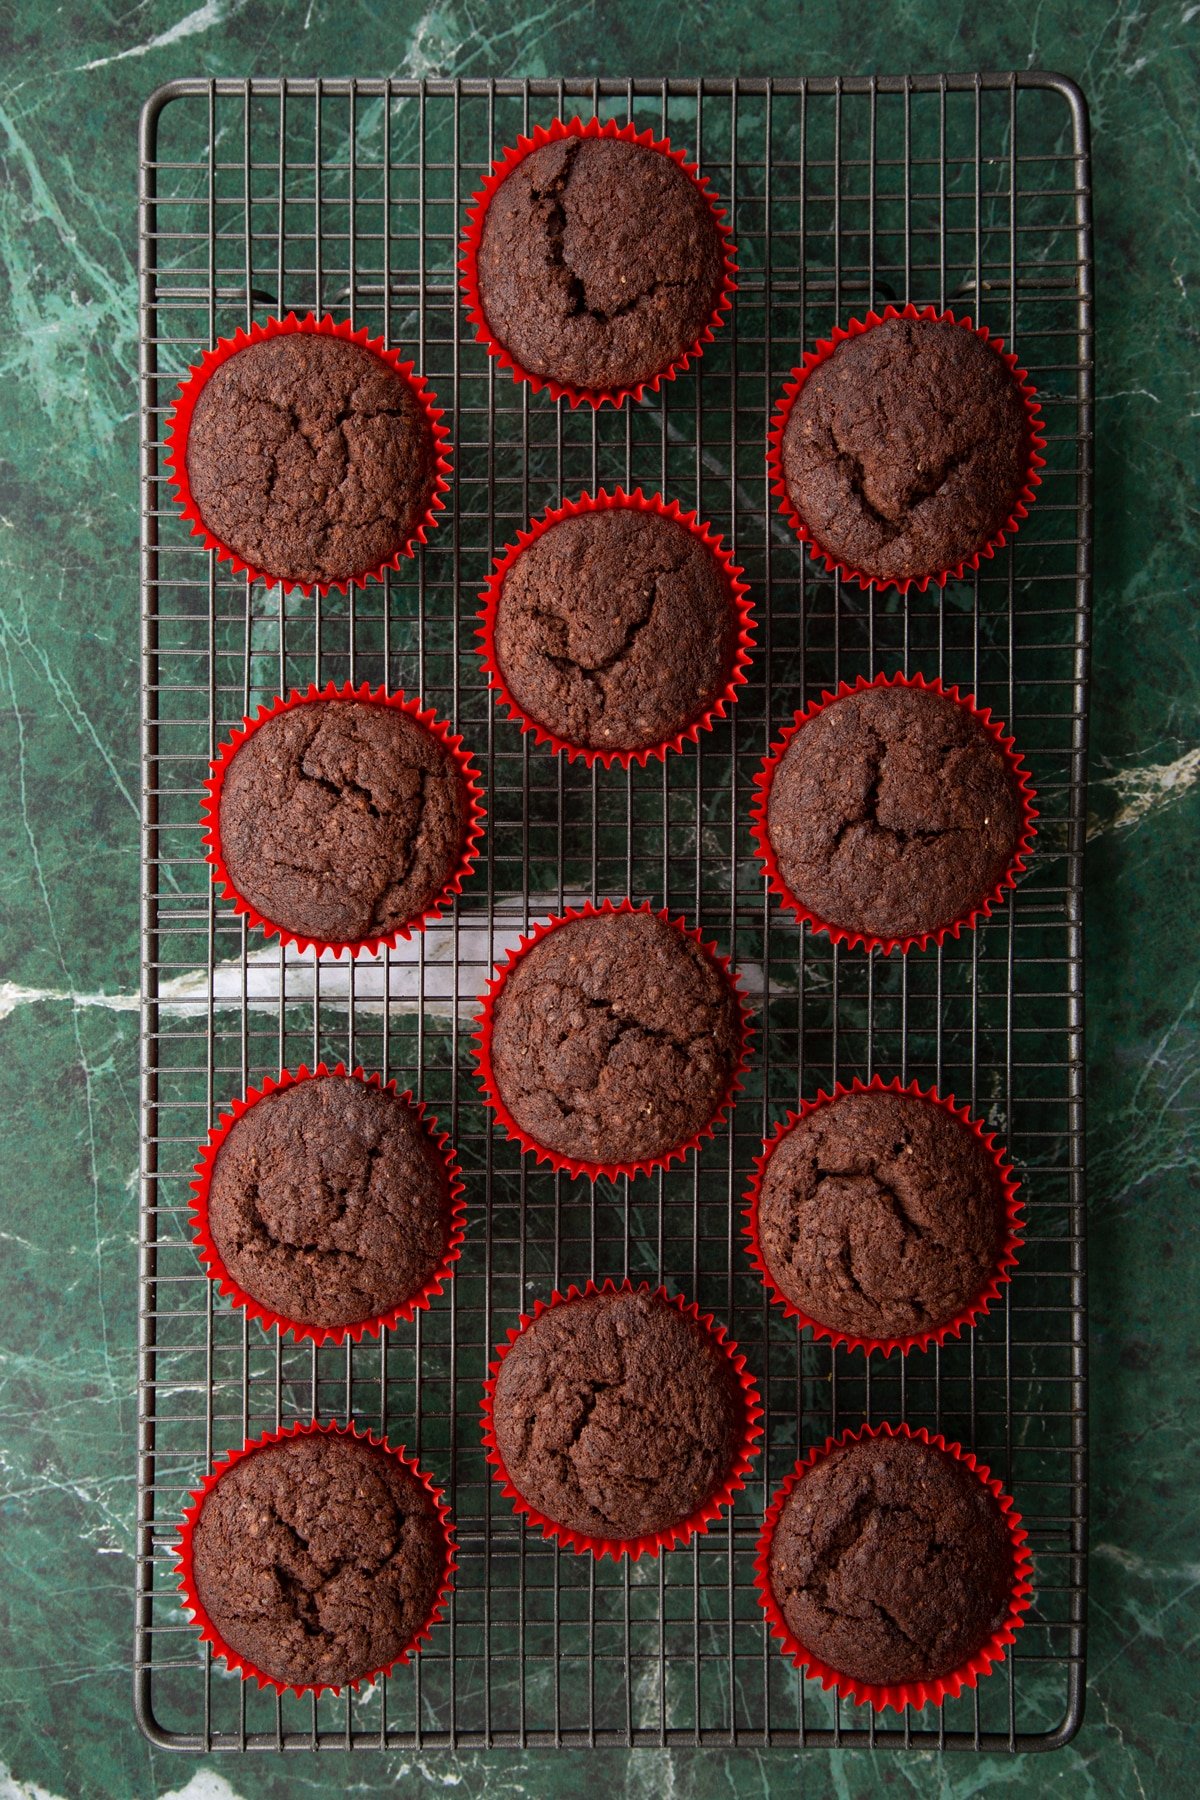 Freshly baked vegan chocolate cupcakes on a wire cooling rack.